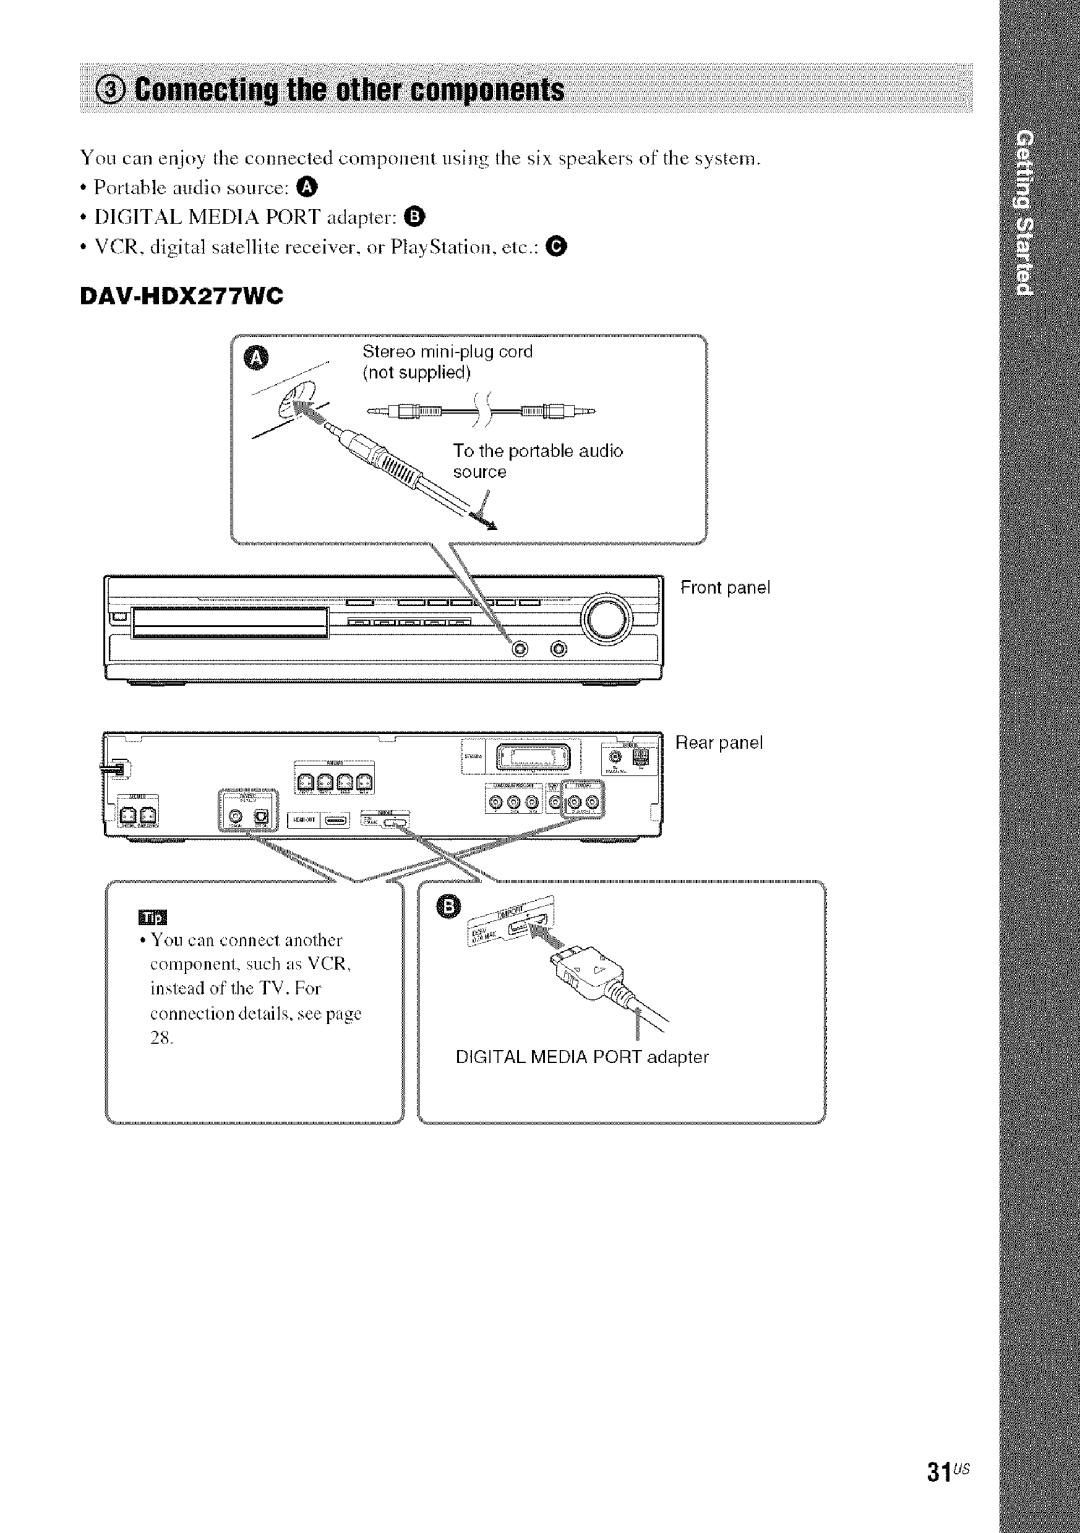 Sony manual 31us, DAV-HDX277WC, •Porlable audio source: t_, •DIG1TAL MEDIA PORT adapter: O, connection details, see page 